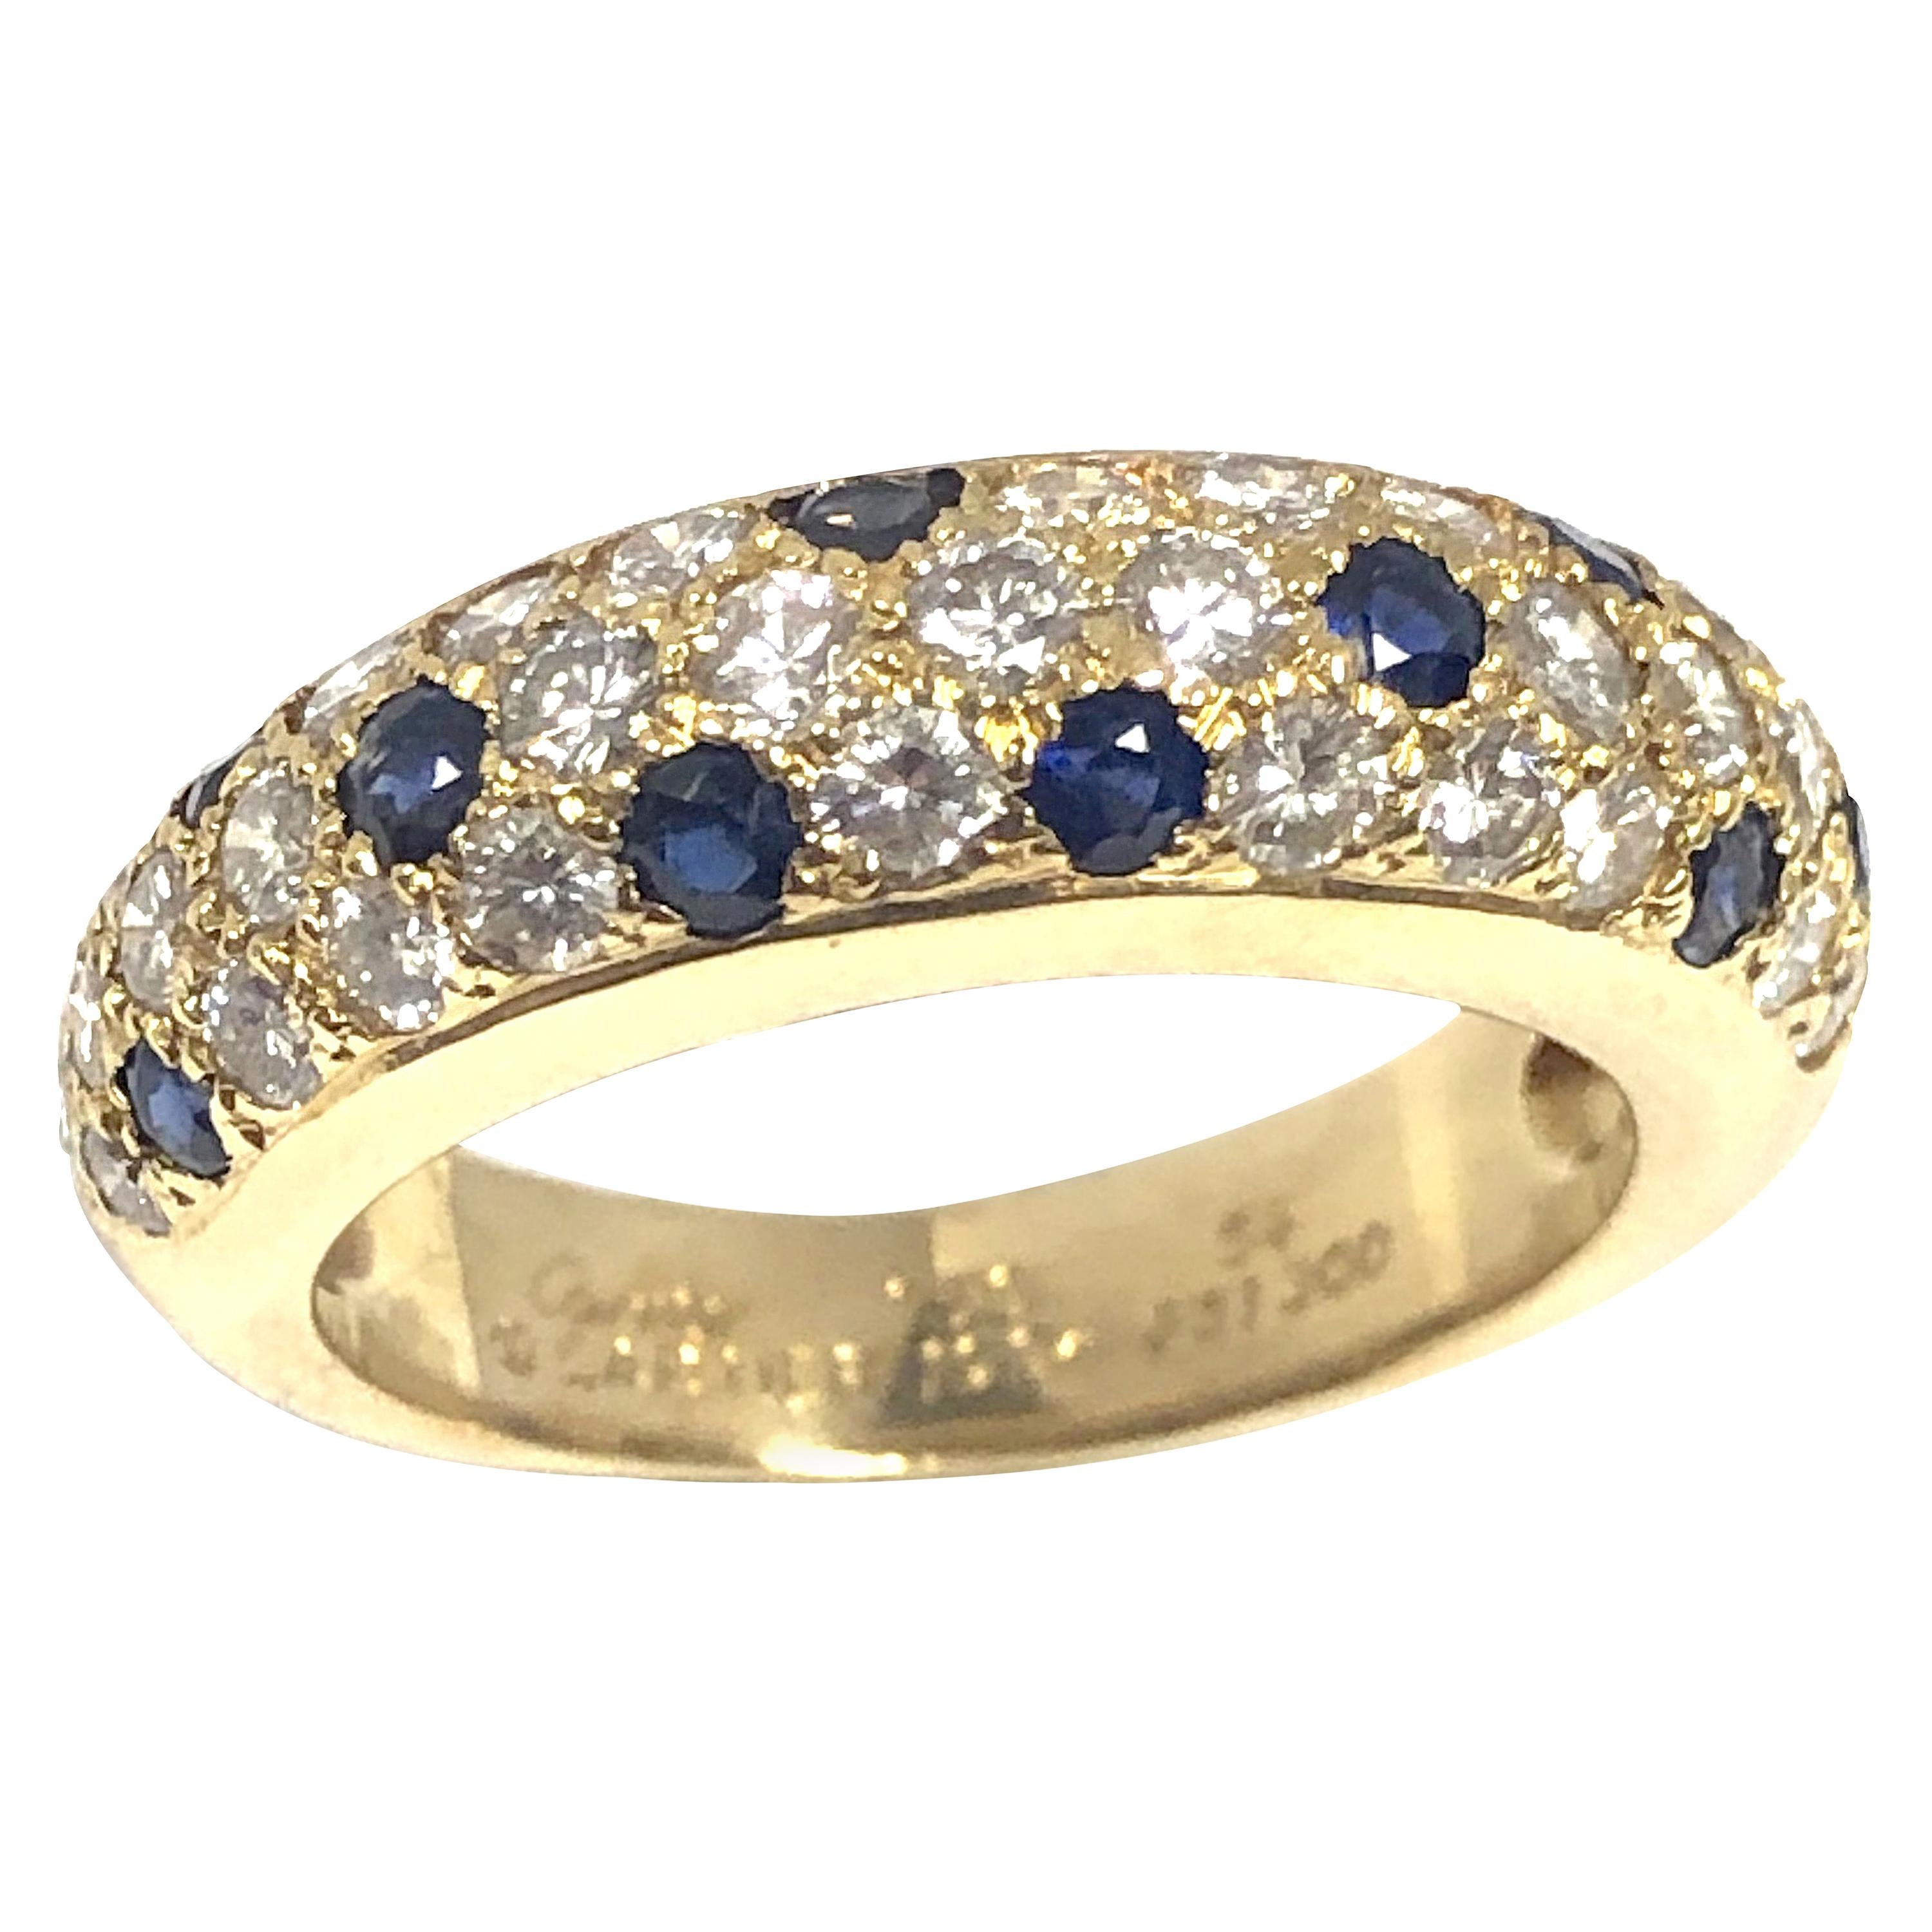 Cartier Yellow Gold Diamond and Sapphire Panther Mimi Band Ring